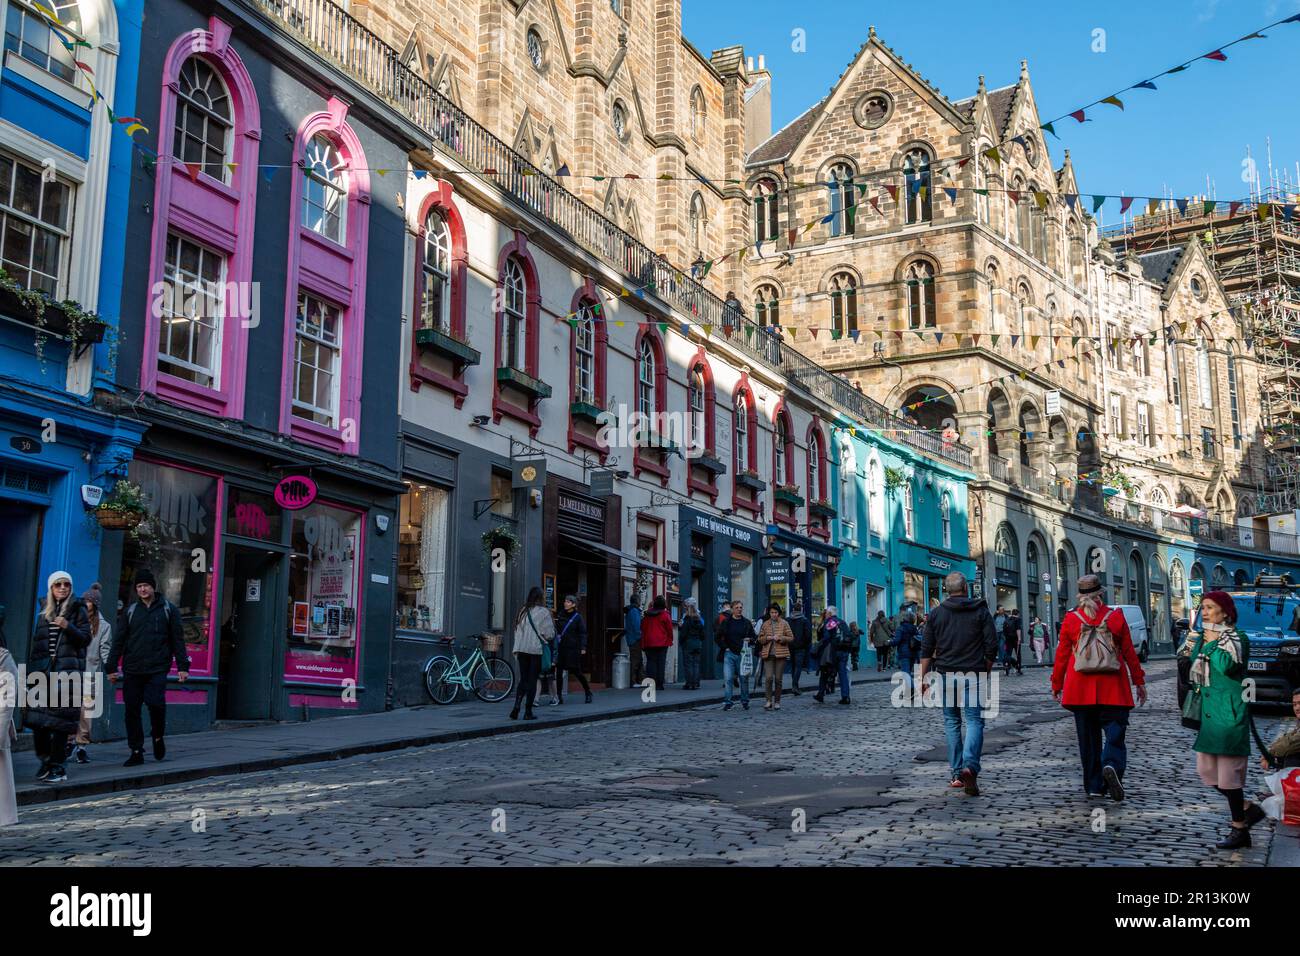 A view of the exterior of the colourful, small, independent shops on Victoria Street, Old Town, Edinburgh, UK. Stock Photo